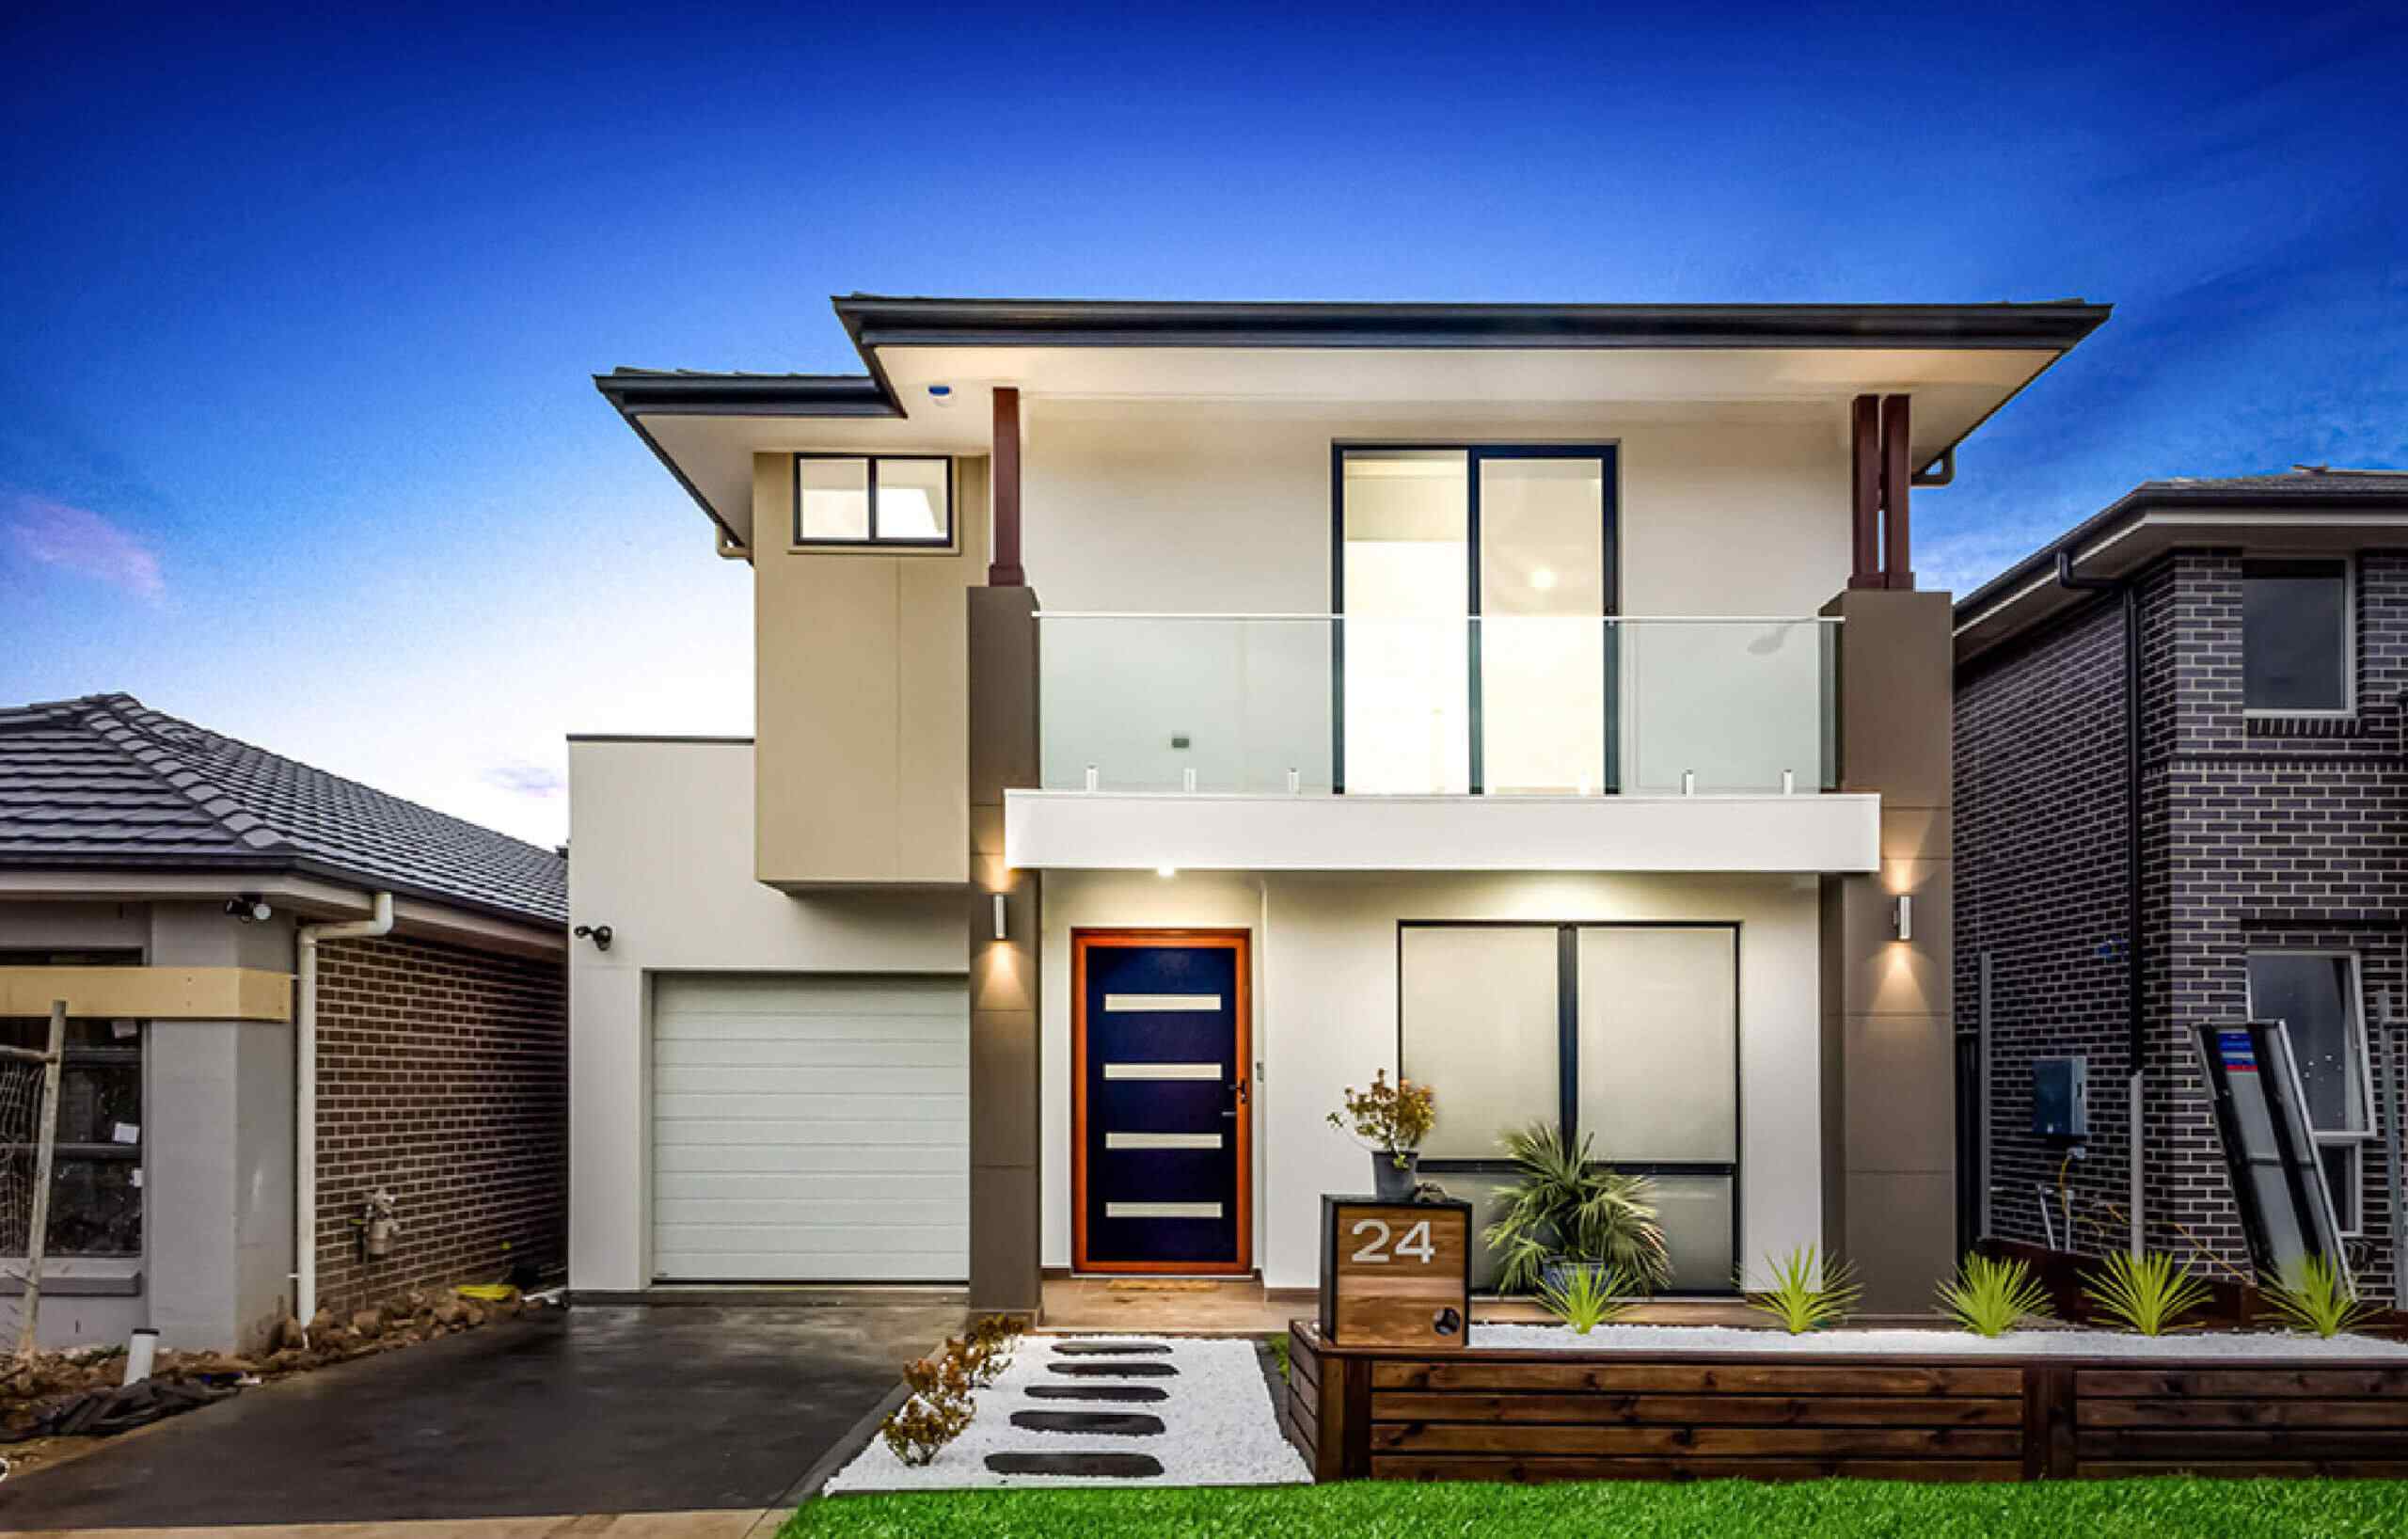 Best choice of Builders in Canberra